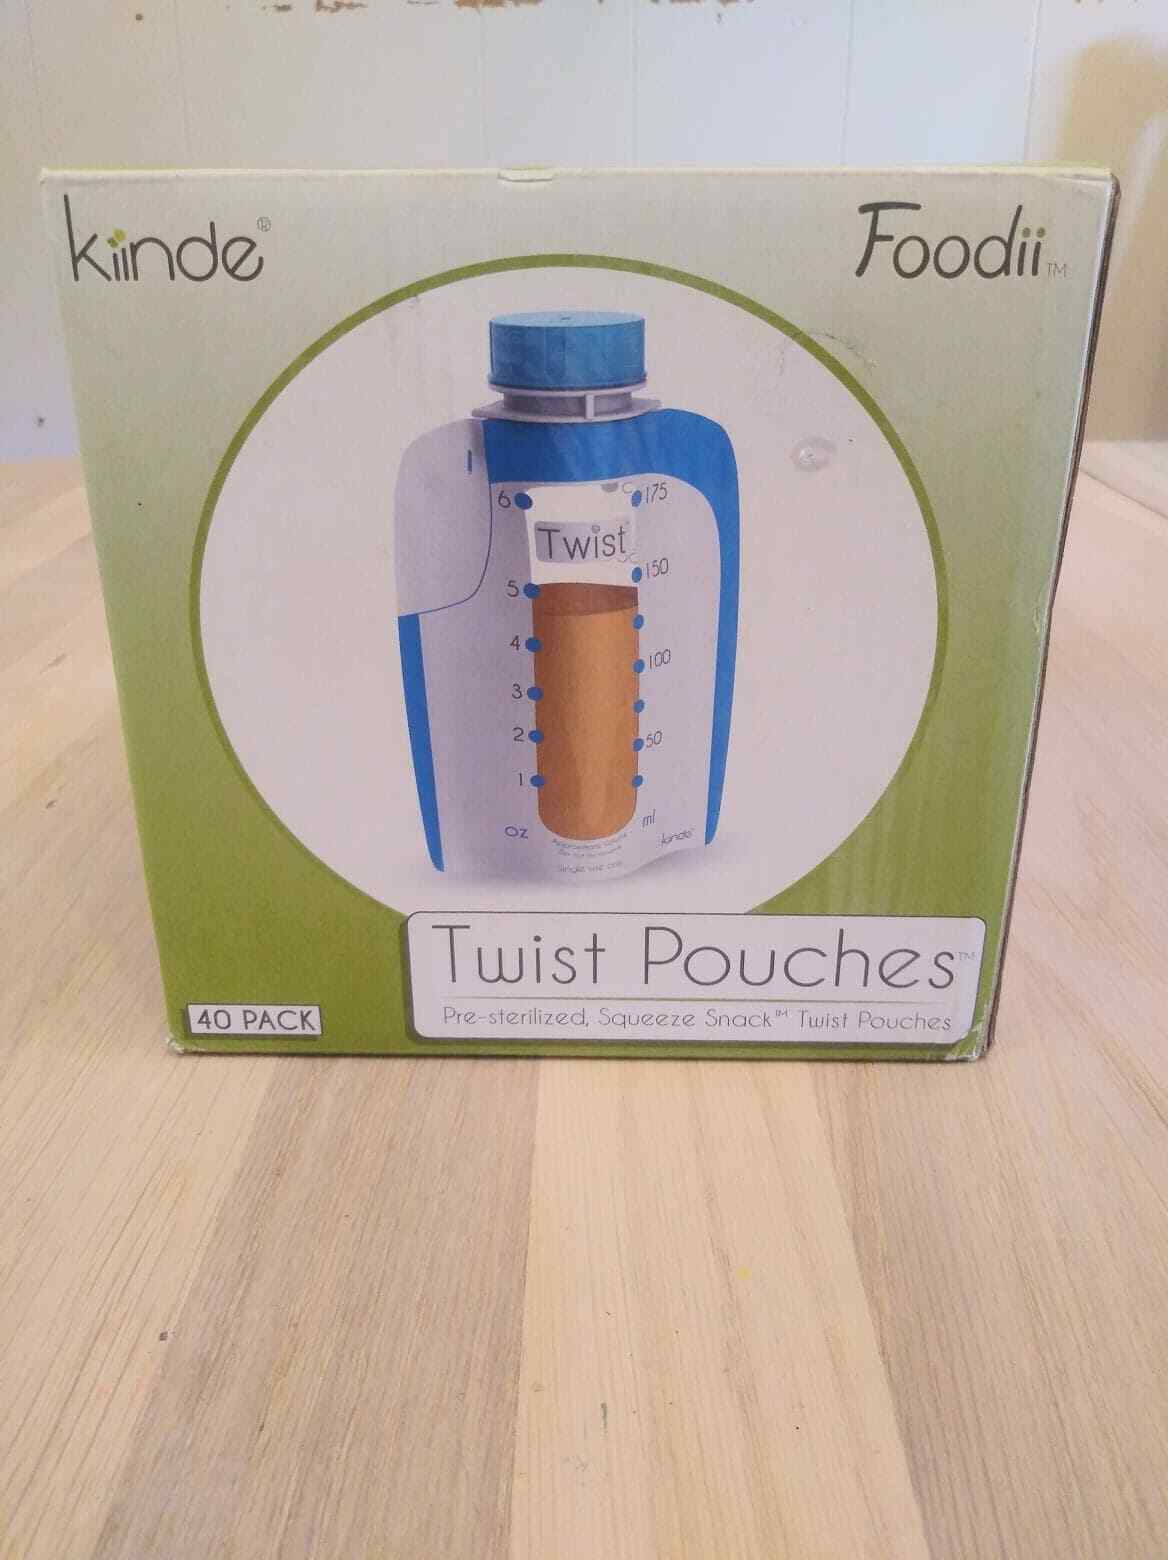 New Kiinde Foodii Twist Pouches (6 Oz - Pack Of 40) Squeeze Snack Food Storage